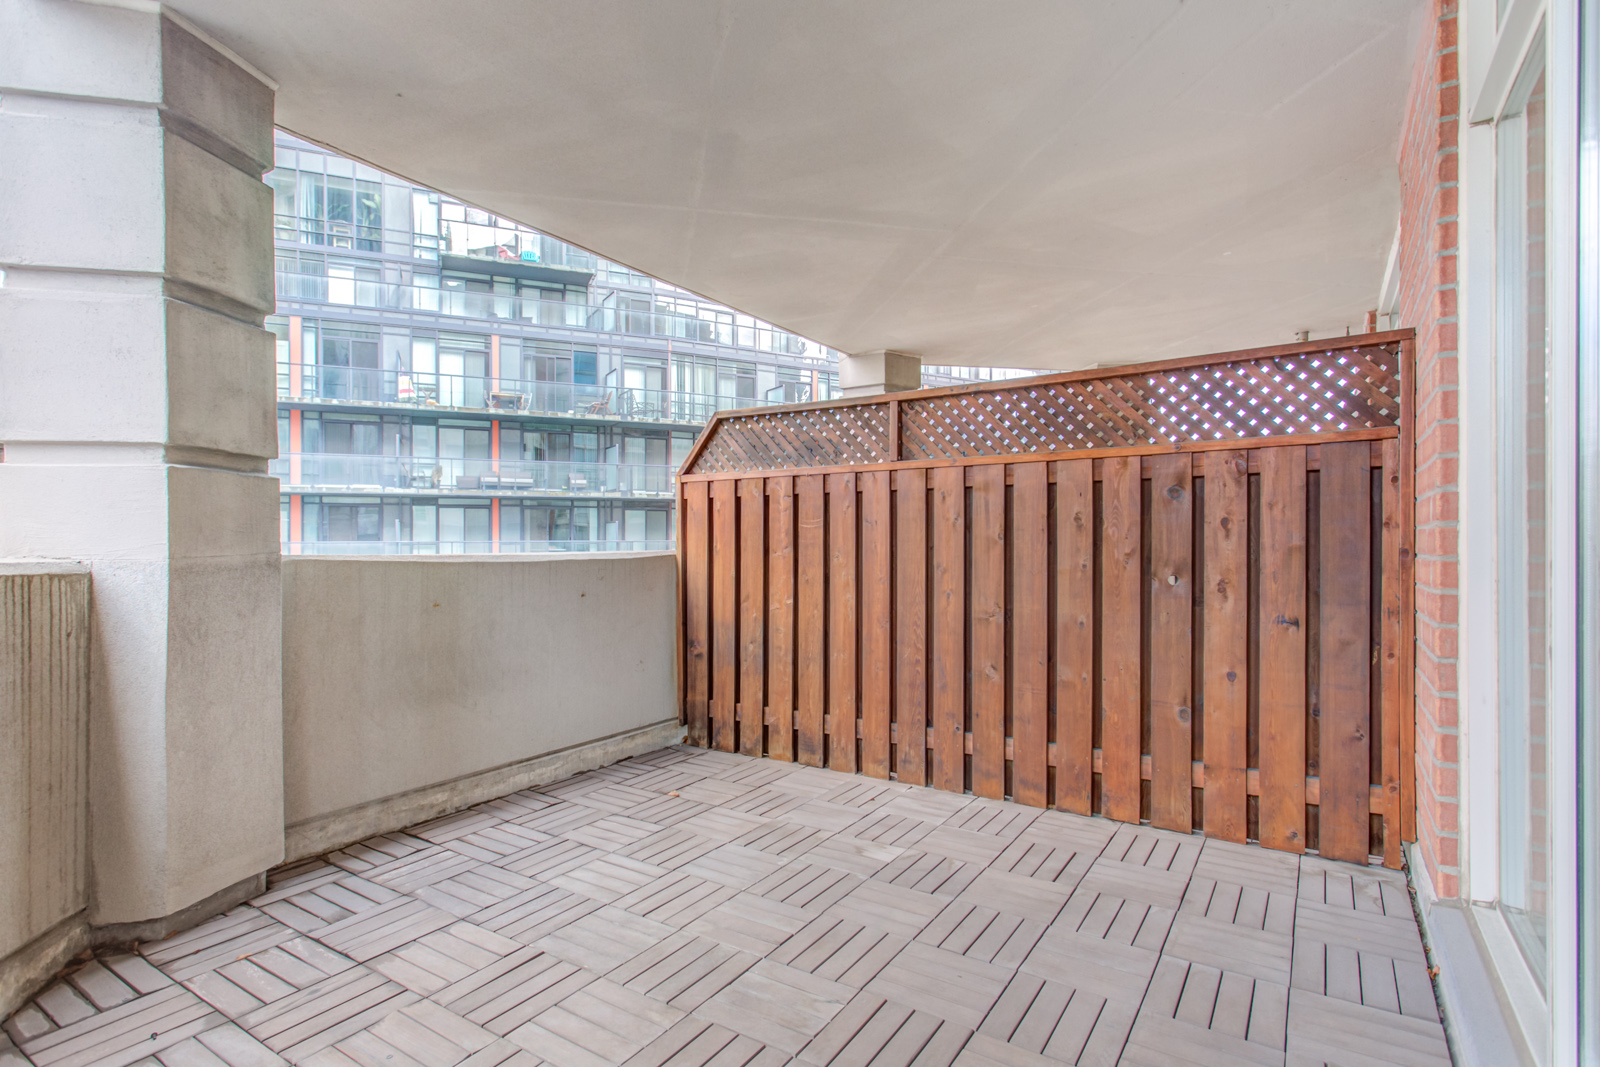 Balcony and deck of 20 Collier St Unit 408 with tiled floors and red wood fence.